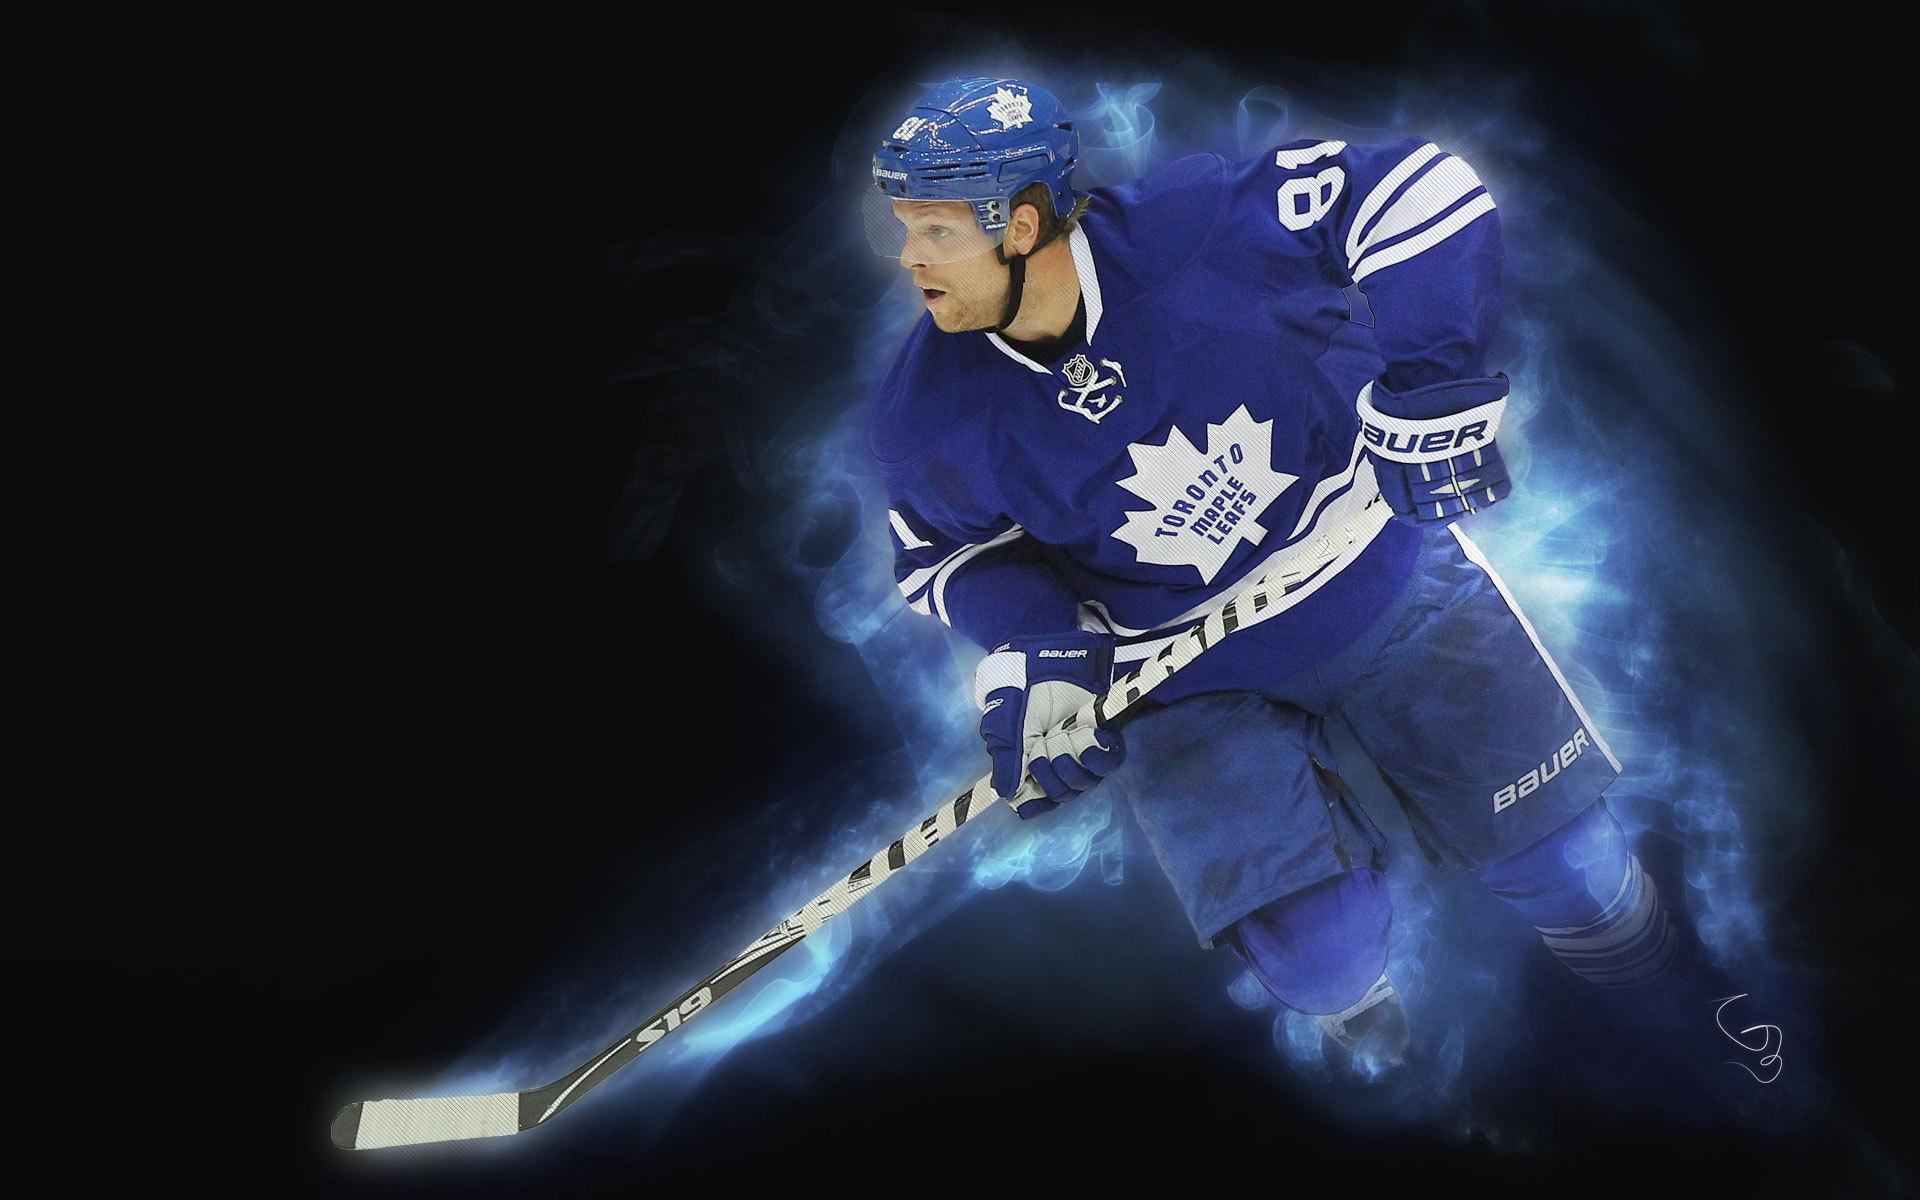 Famous Hockey player Toronto Phil Kessel wallpapers and image